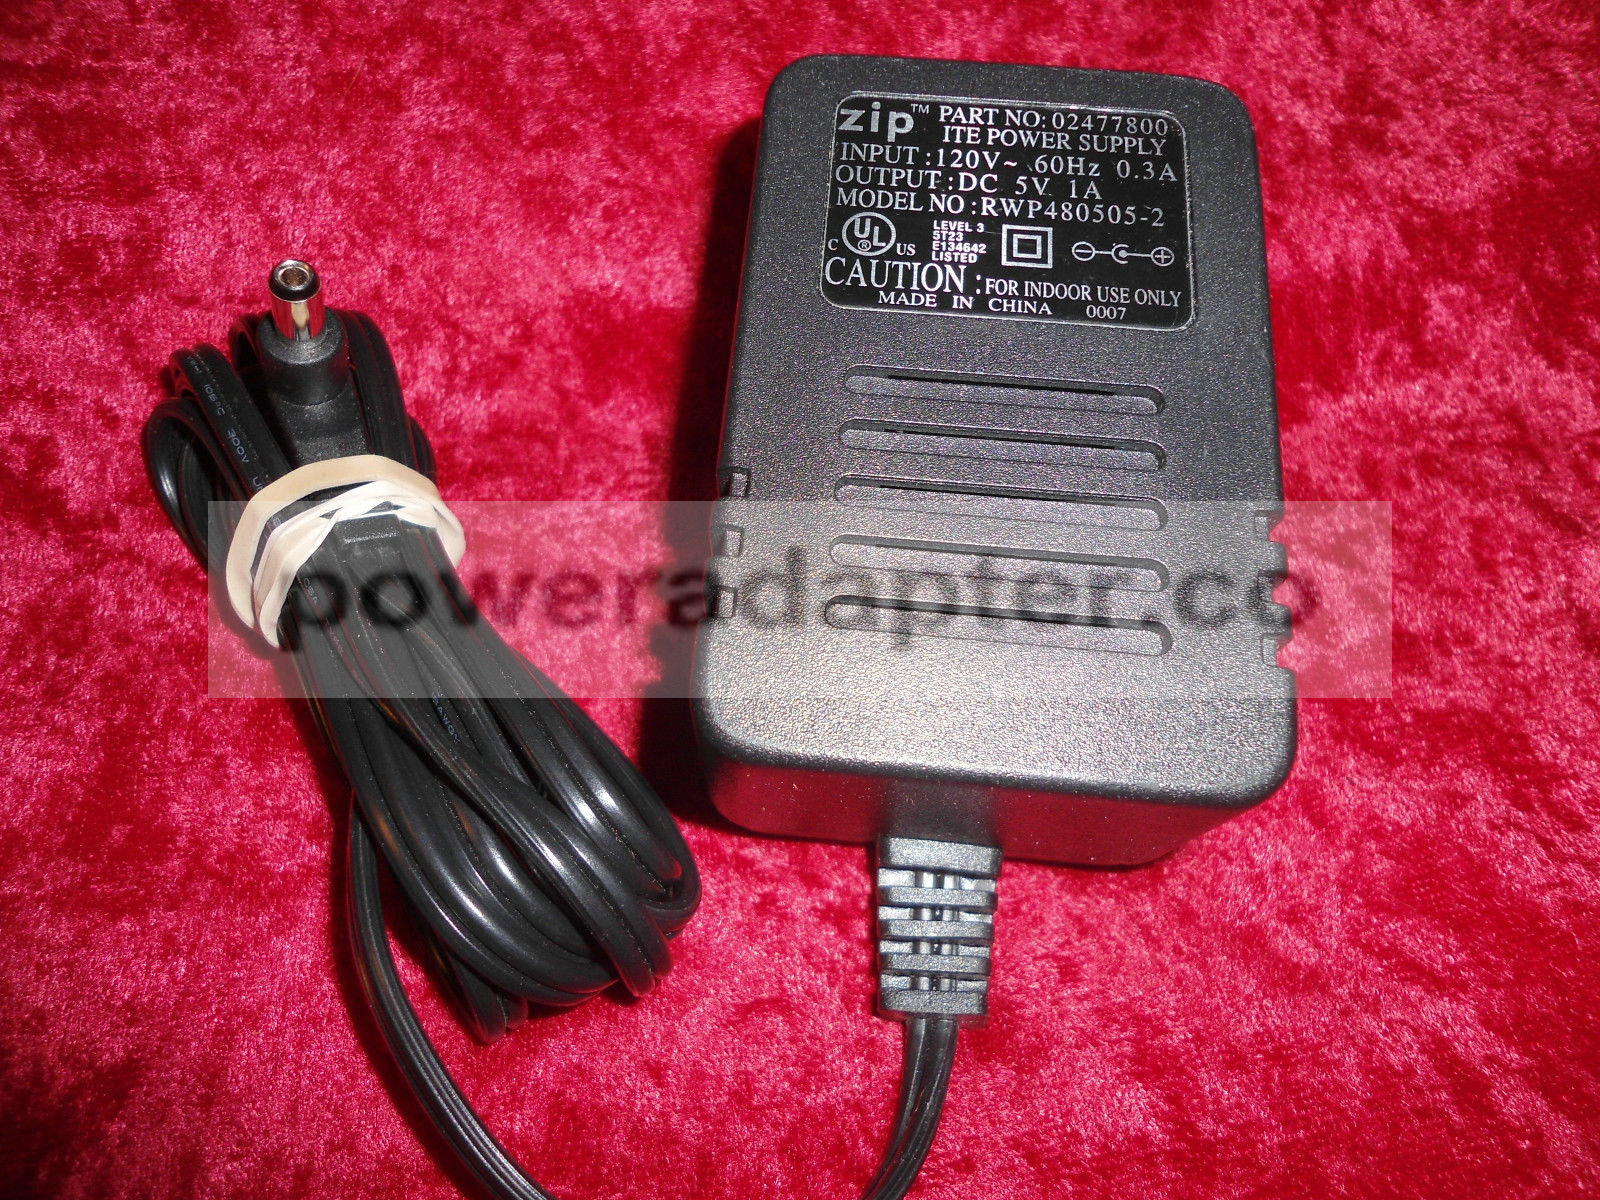 ZIP RWP480505-2 ITE AC ADAPTER CORD MODEL PN 02477800 5 VOLT/1 AMP Output Voltage: 5 V Model: RWP480505-2 Country o - Click Image to Close